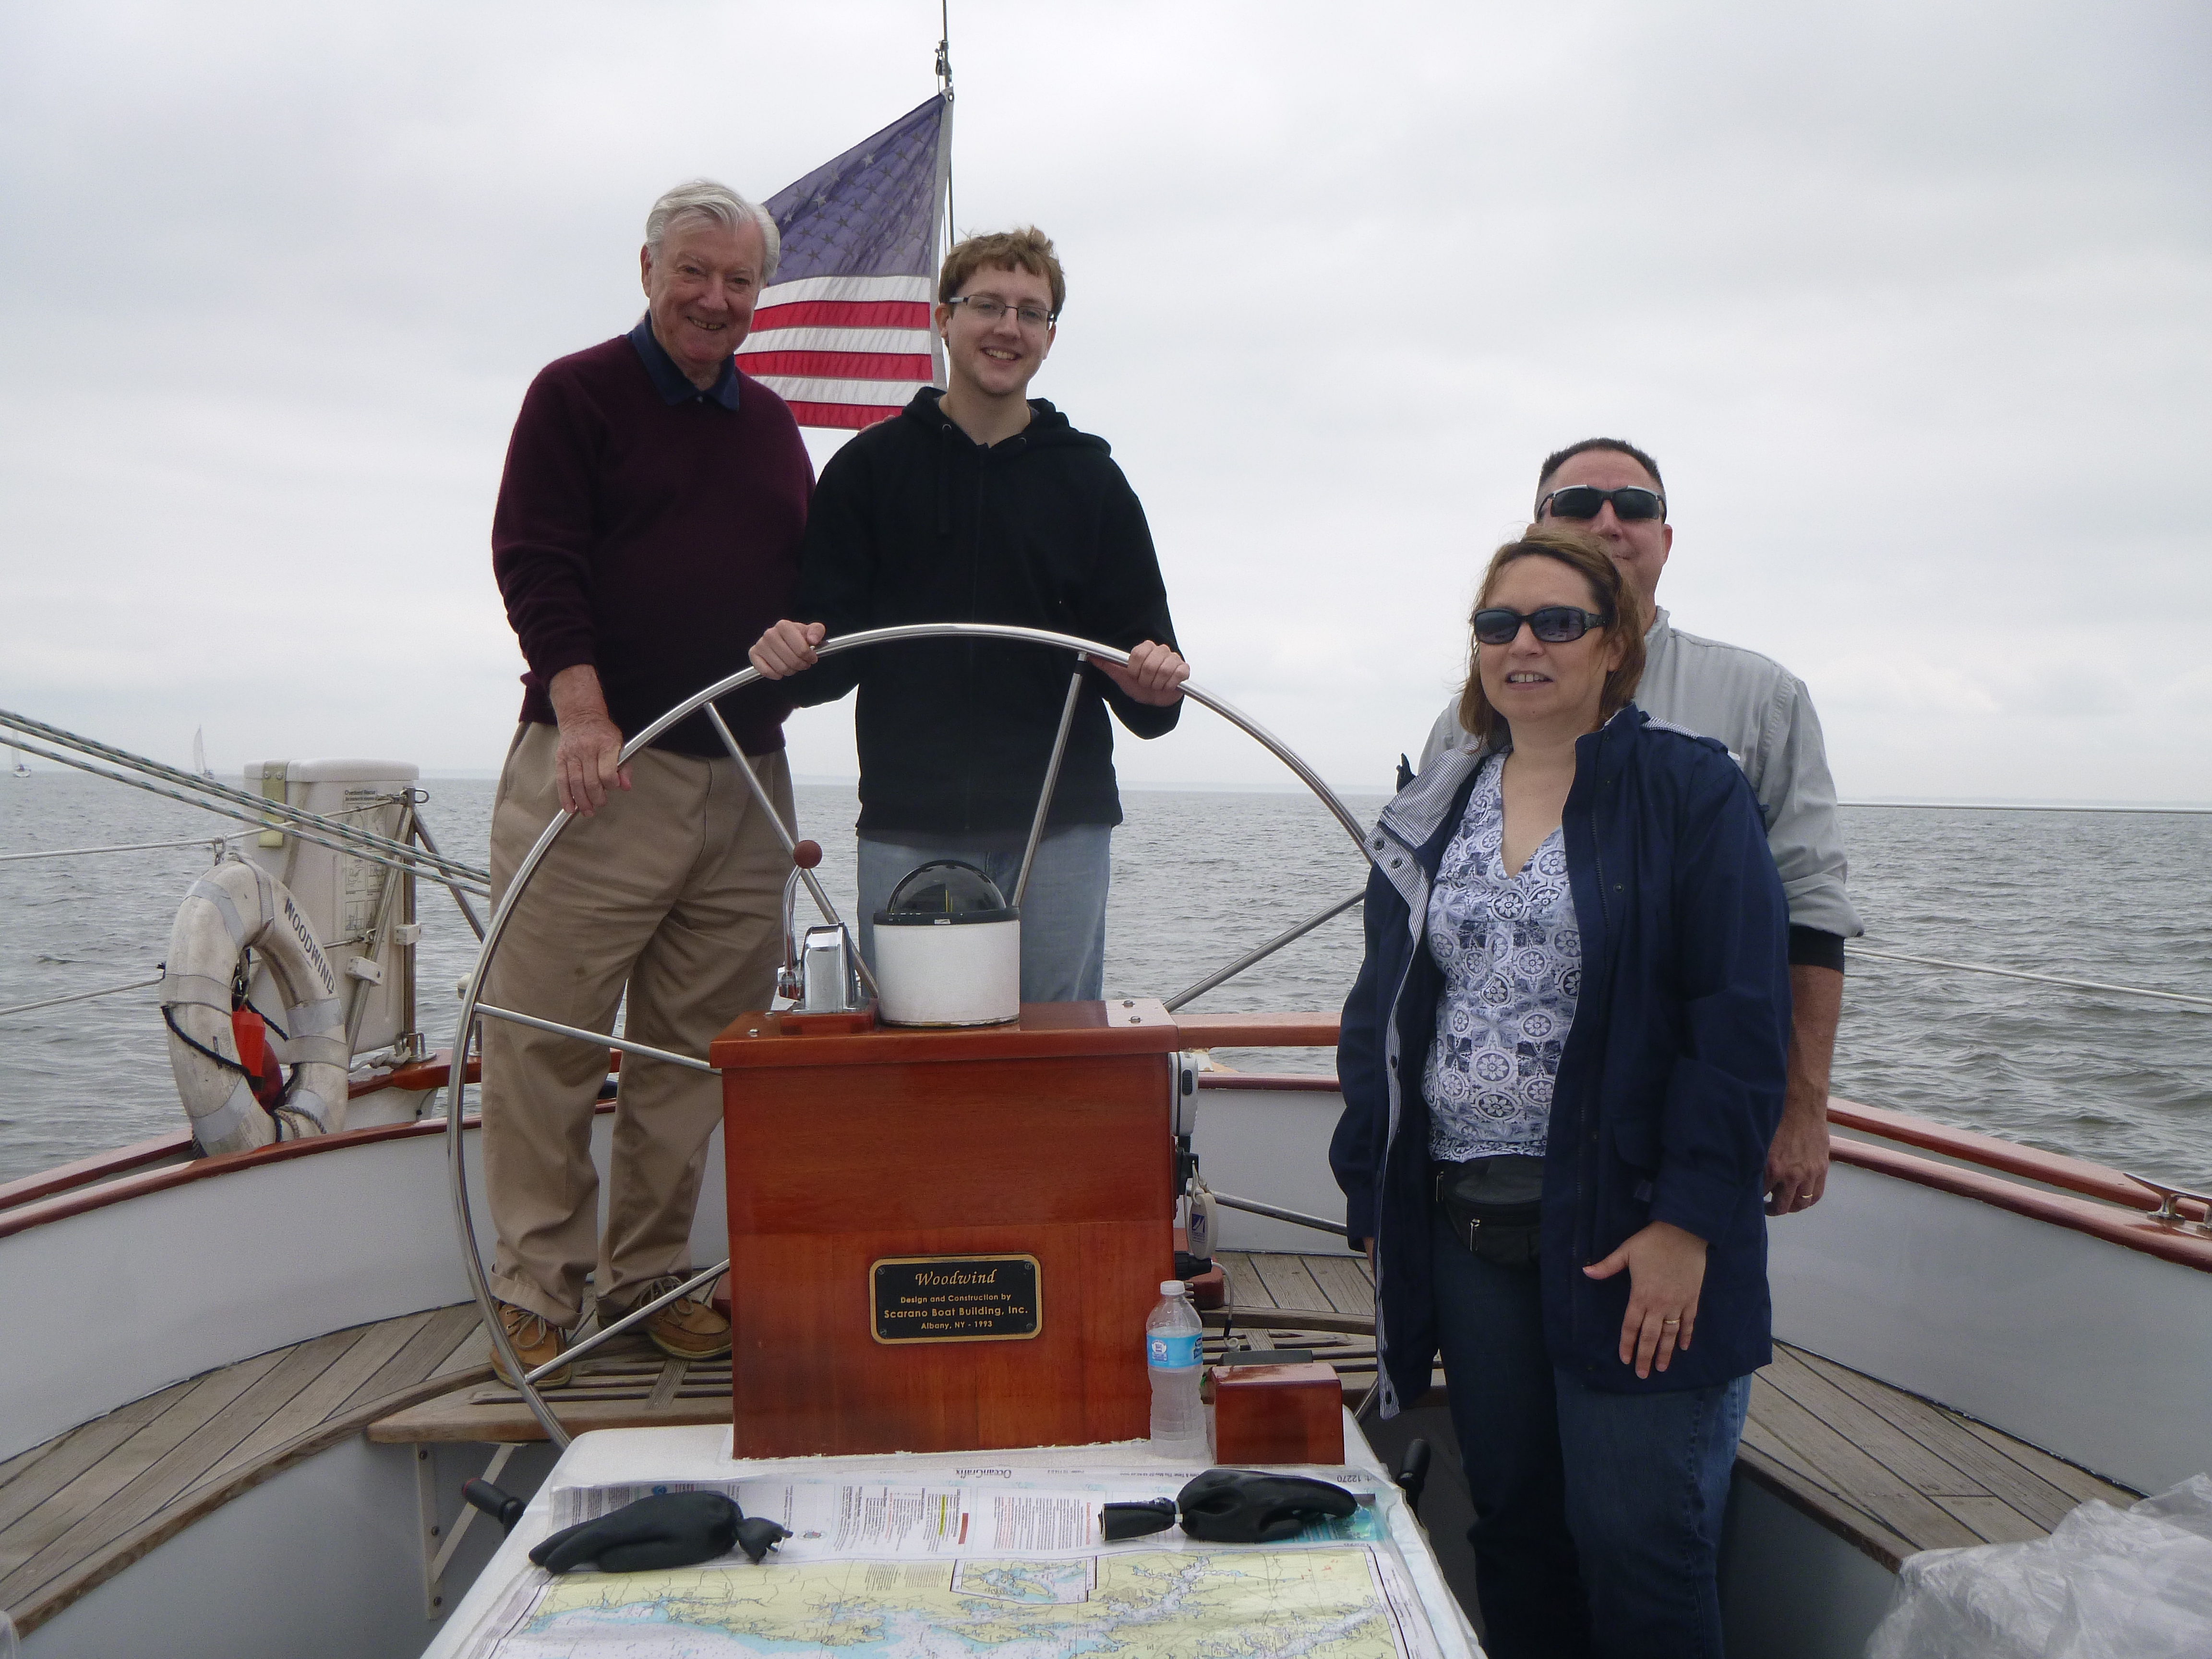 The Hannon Family aboard the Schooner Woodwind and steering the helm